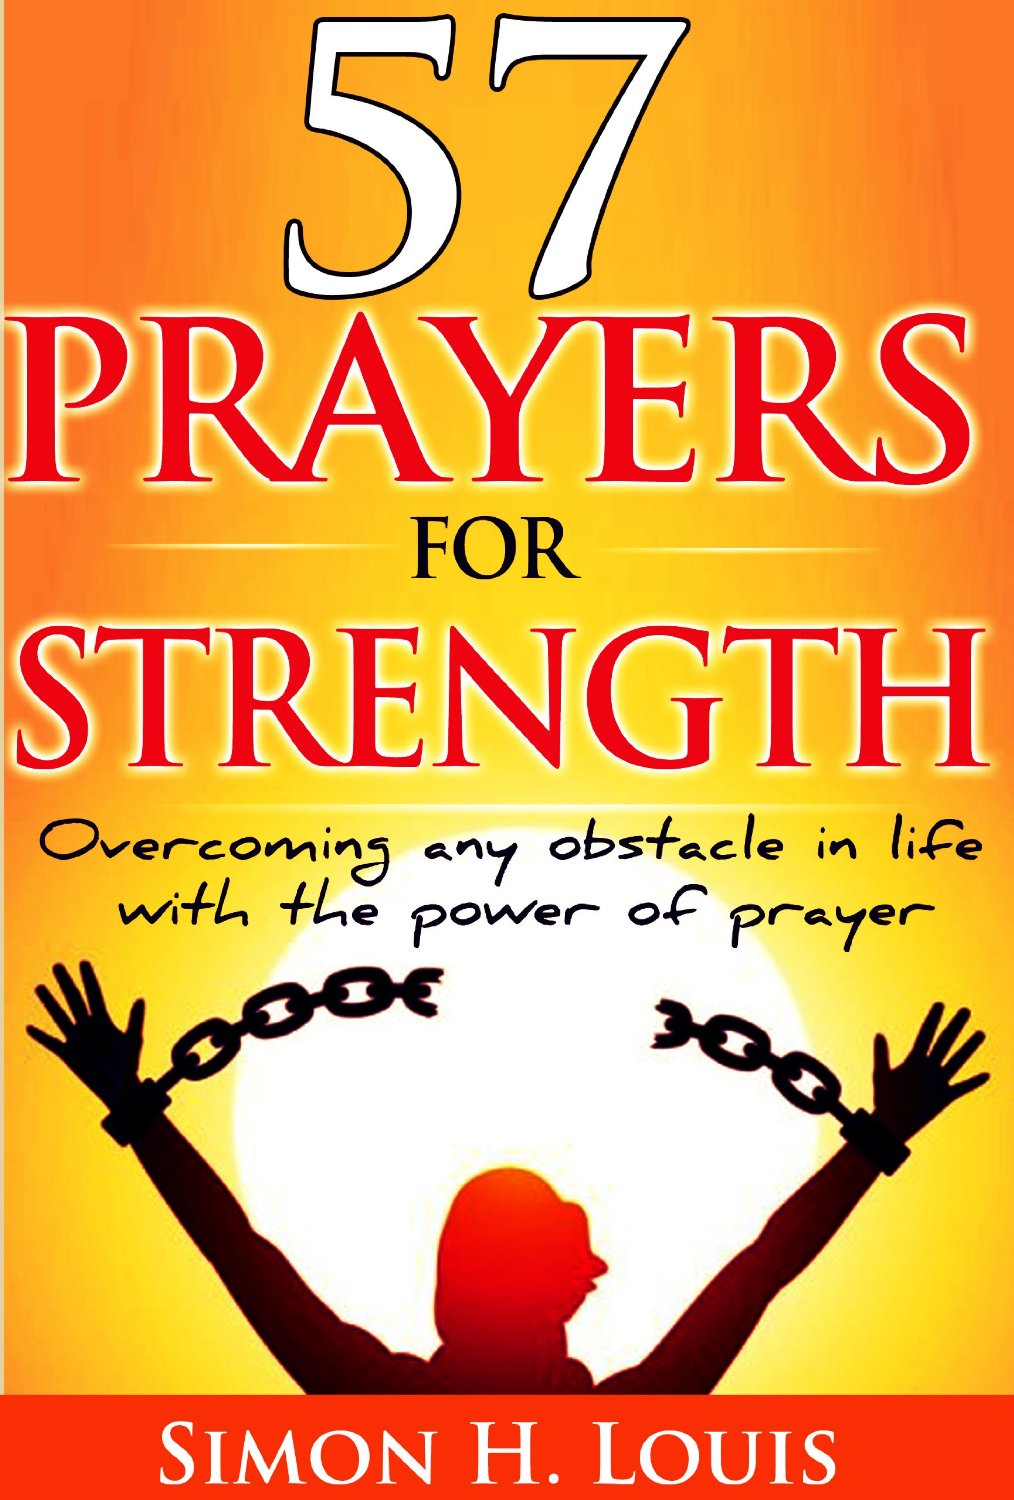 57 prayers for strength by Simon H. Louis